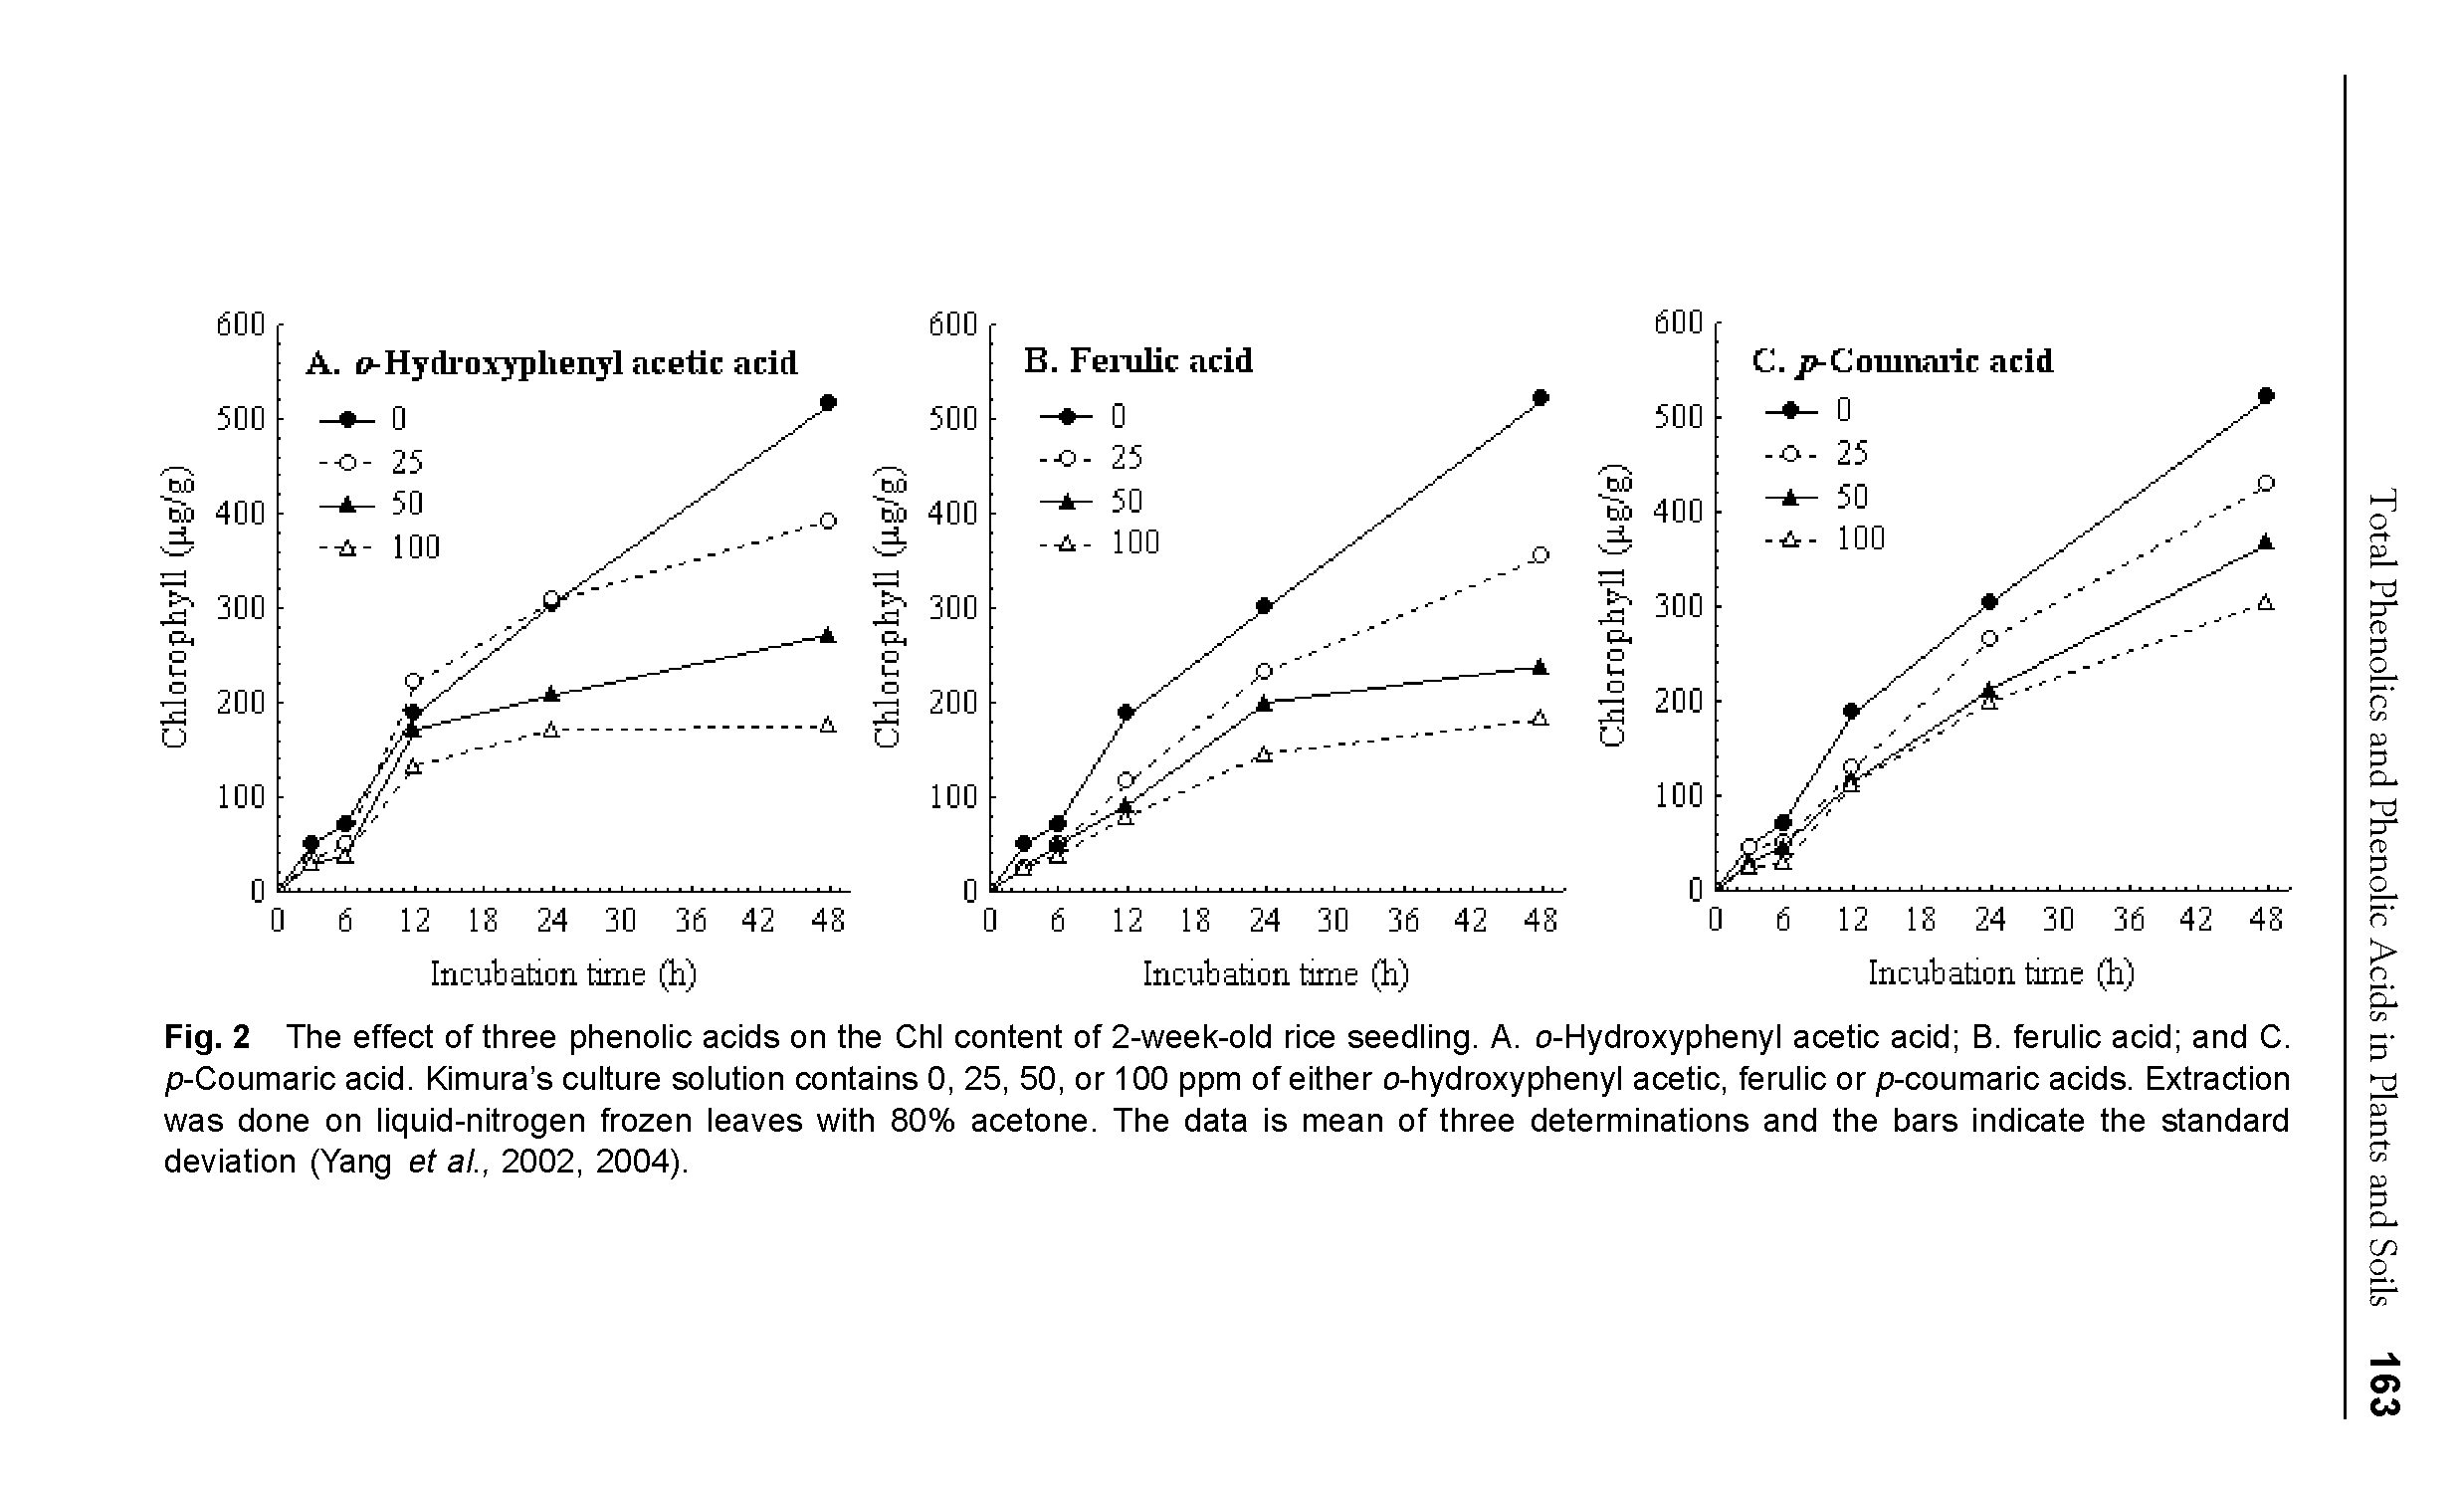 Fig. 2 The effect of three phenolic acids on the Chi content of 2-week-old rice seedling. A. o-Hydroxyphenyl acetic acid B. ferulic acid and C. p-Coumaric acid. Kimura s culture solution contains 0, 25, 50, or 100 ppm of either o-hydroxyphenyl acetic, ferulic or p-coumaric acids. Extraction was done on liquid-nitrogen frozen leaves with 80% acetone. The data is mean of three determinations and the bars indicate the standard deviation (Yang et al. 2002, 2004).